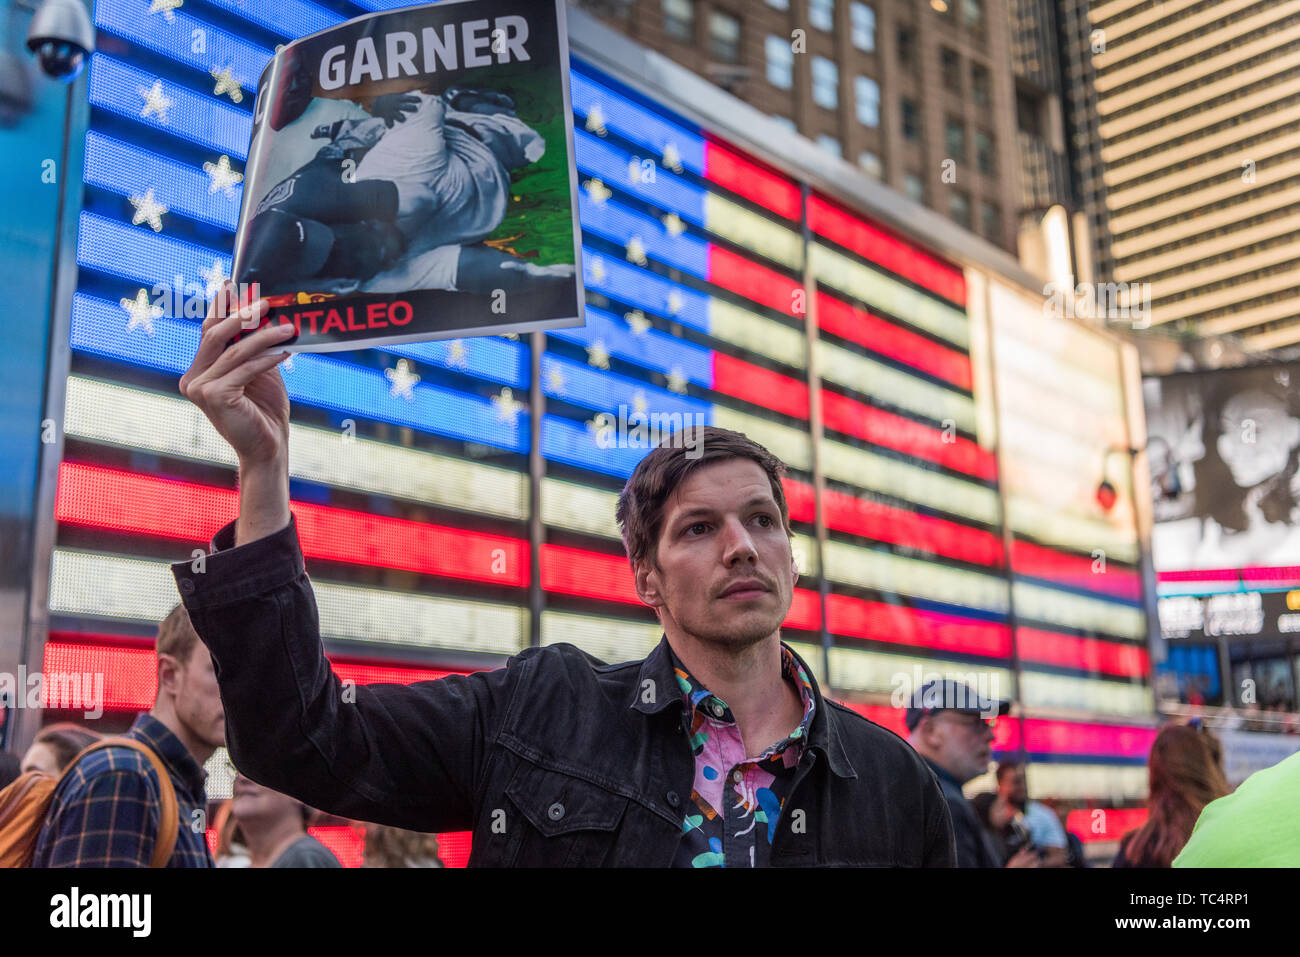 New York, United States. 04th June, 2019. Protesters rallied in Times Square in New York City demanding the firing of Officer Pantaleo for the choking death of Eric Garner in 2014. Daniel Pantaleo is currently standing administrative trial which began on May 13. On May 21, the judge overseeing his case delayed the remainder of the hearing until June 5, 2019. Pantaleo has been on desk duty since Eric Garner's death and could face penalties ranging from loss of vacation days to firing from the NYPD. Credit: Gabriele Holtermann-Gorden/Pacific Press/Alamy Live News Stock Photo